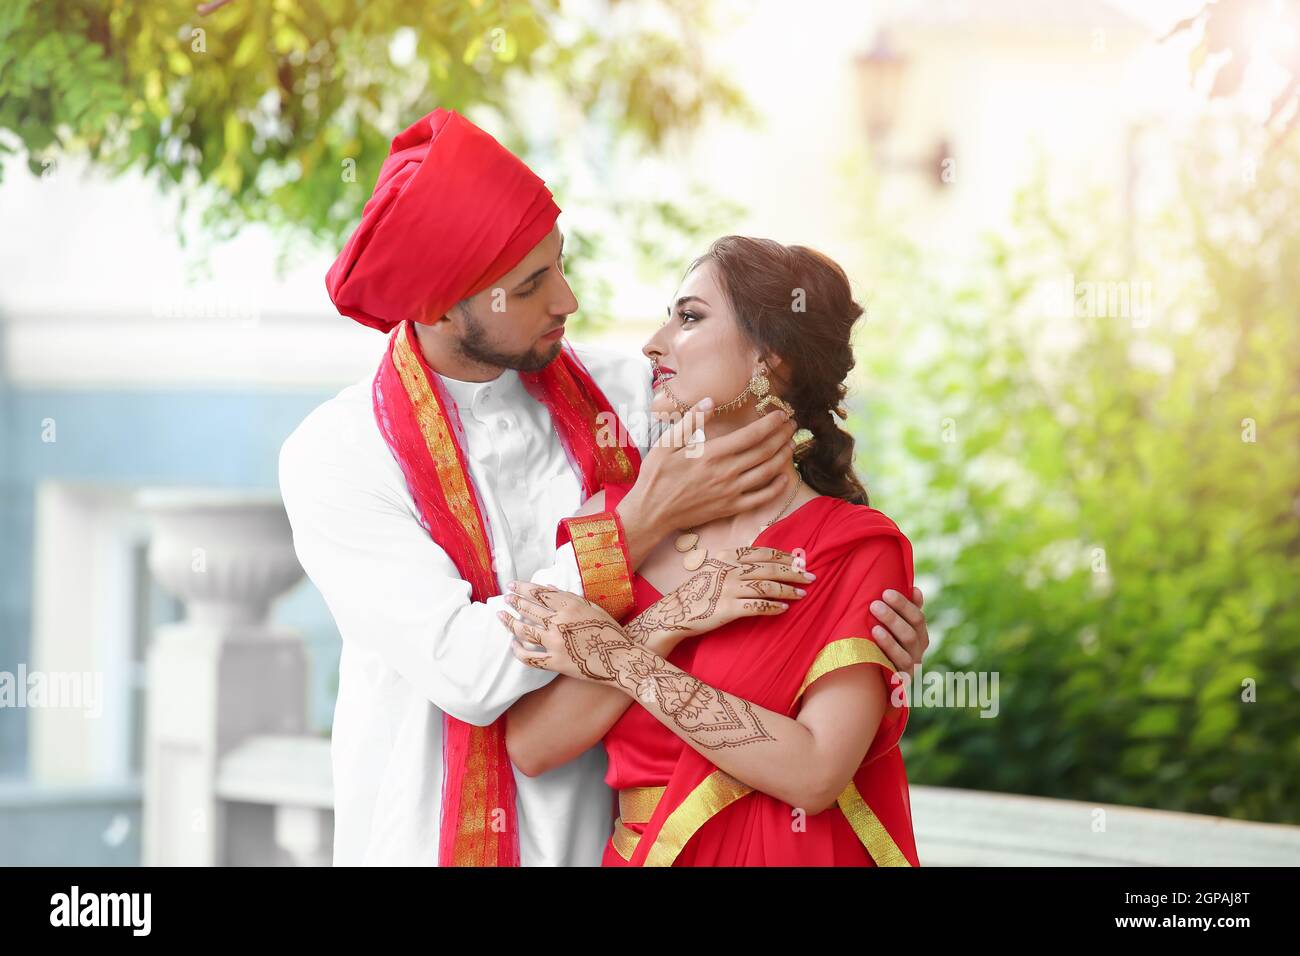 Maharashtrian Wedding Photography - All You Need to Know About It